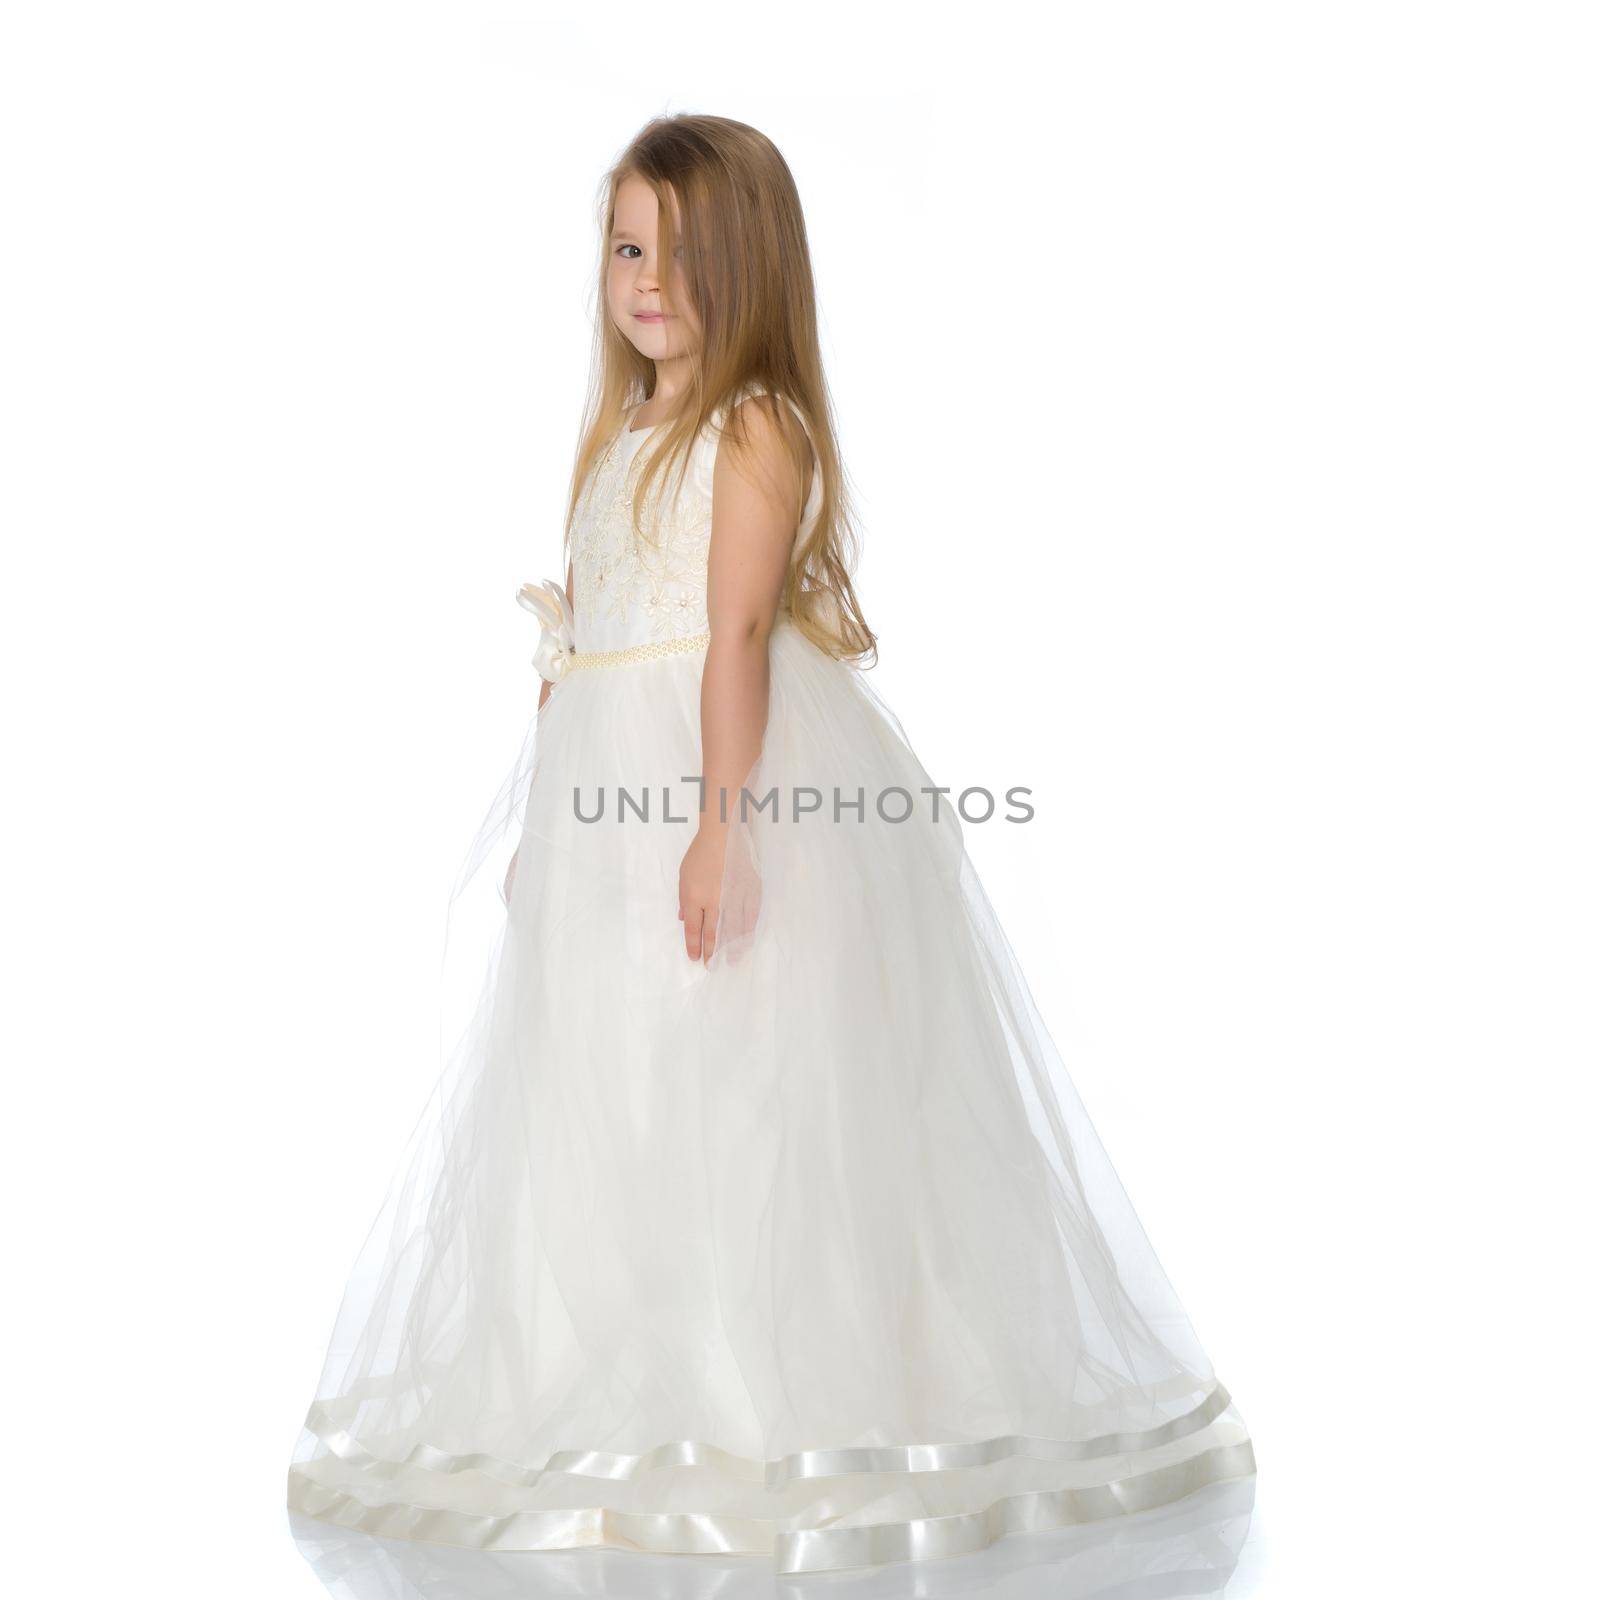 Charming little princess in a long dress. The concept of a happy childhood, beauty and fashion. Isolated on white background.